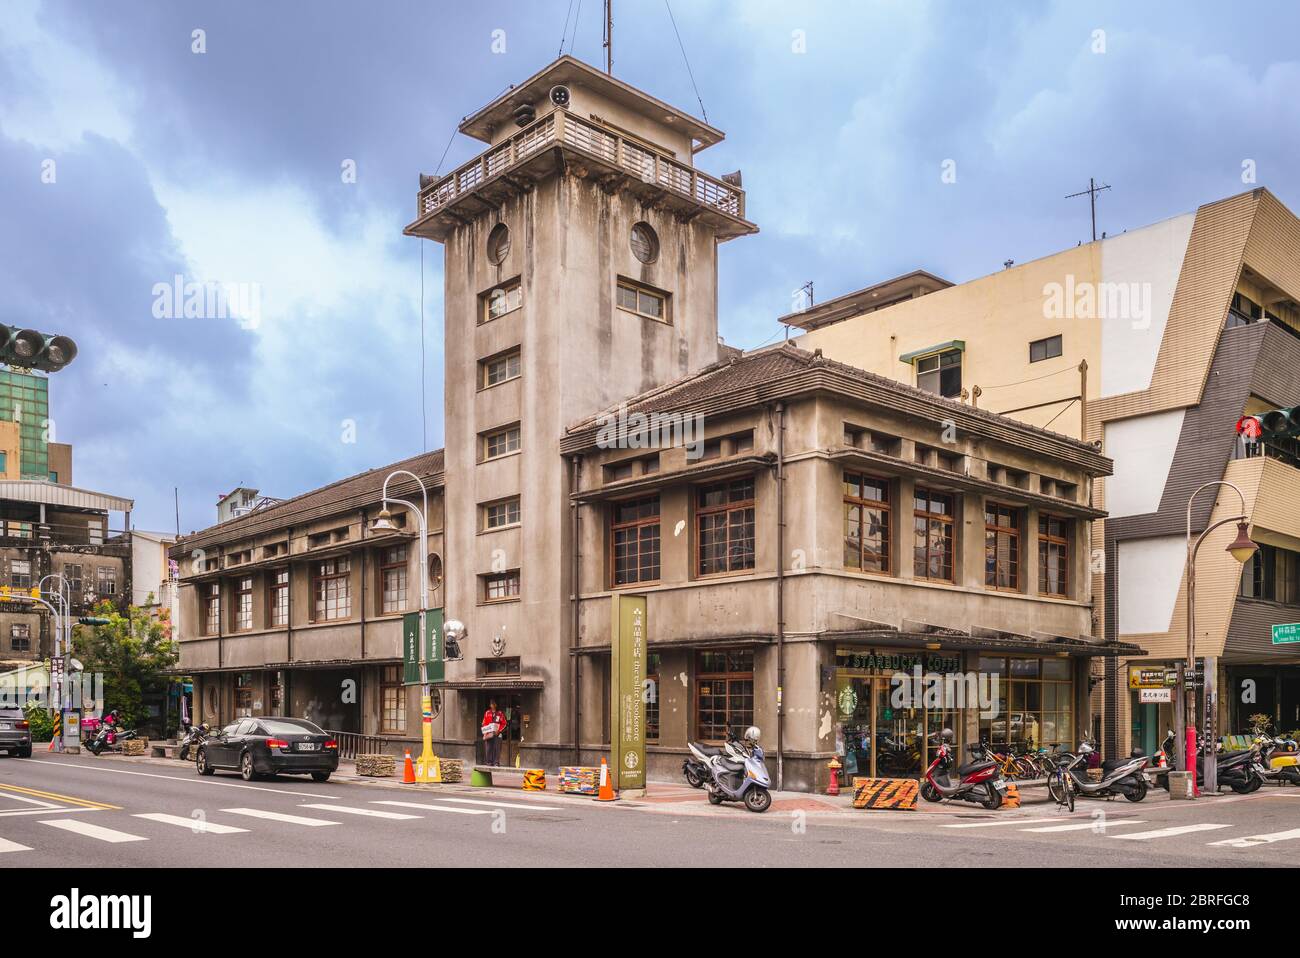 Yunlin, Taiwan - May 16, 2020: Starbucks Huwei store, former Huwei Joint Government Office Building, is a heritage site built in 1930 to look out for Stock Photo